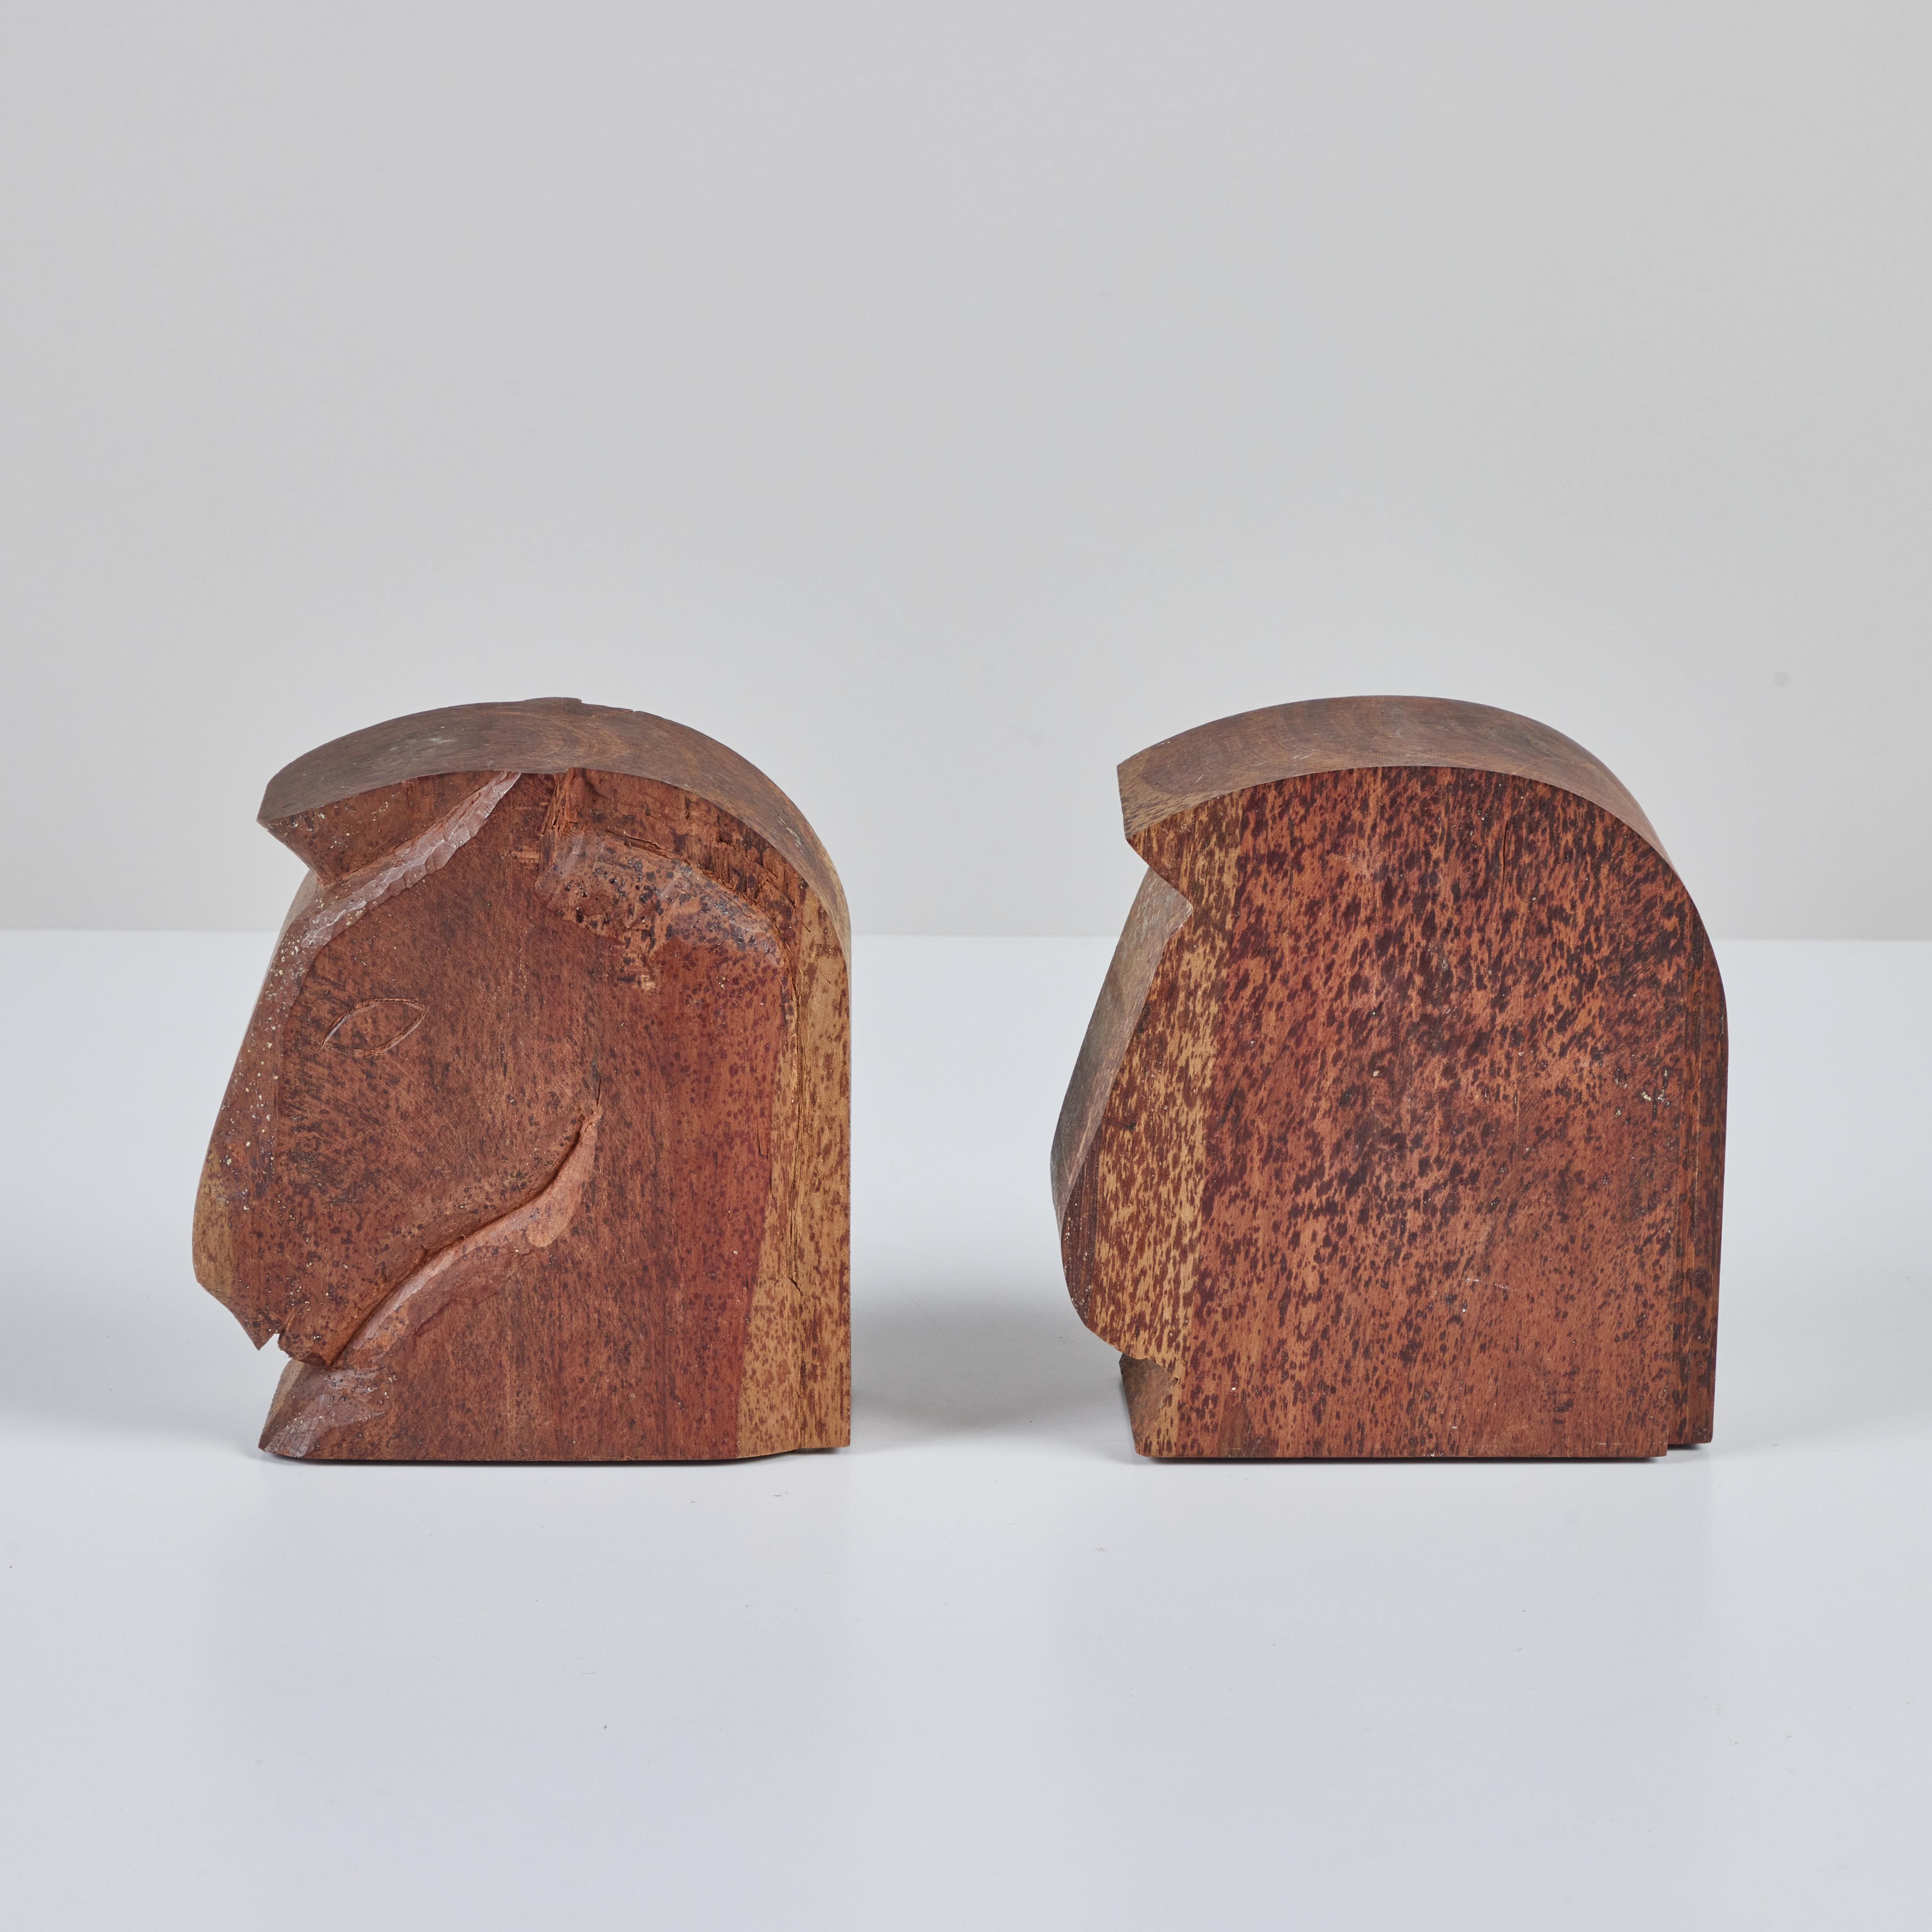 20th Century Pair of Wood Horse Head Bookends For Sale